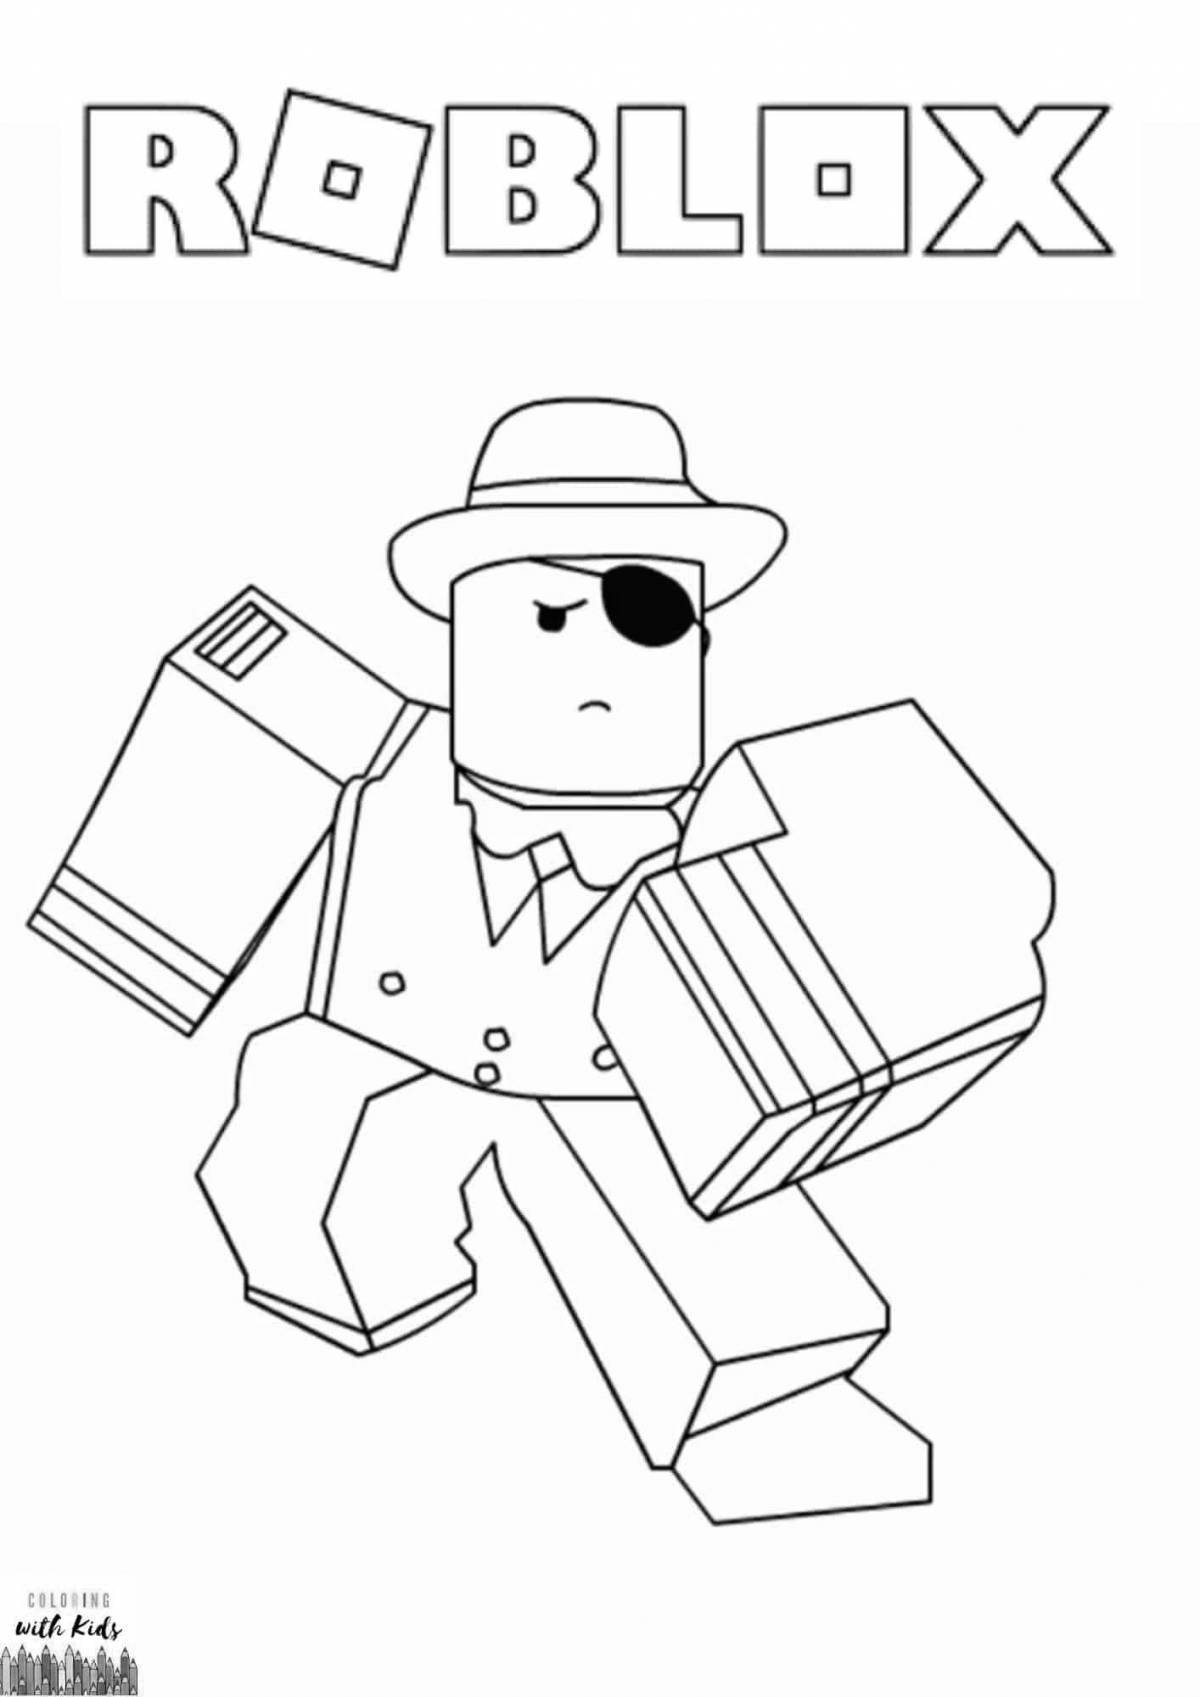 Vibrant roblox marder mystery 2 coloring page